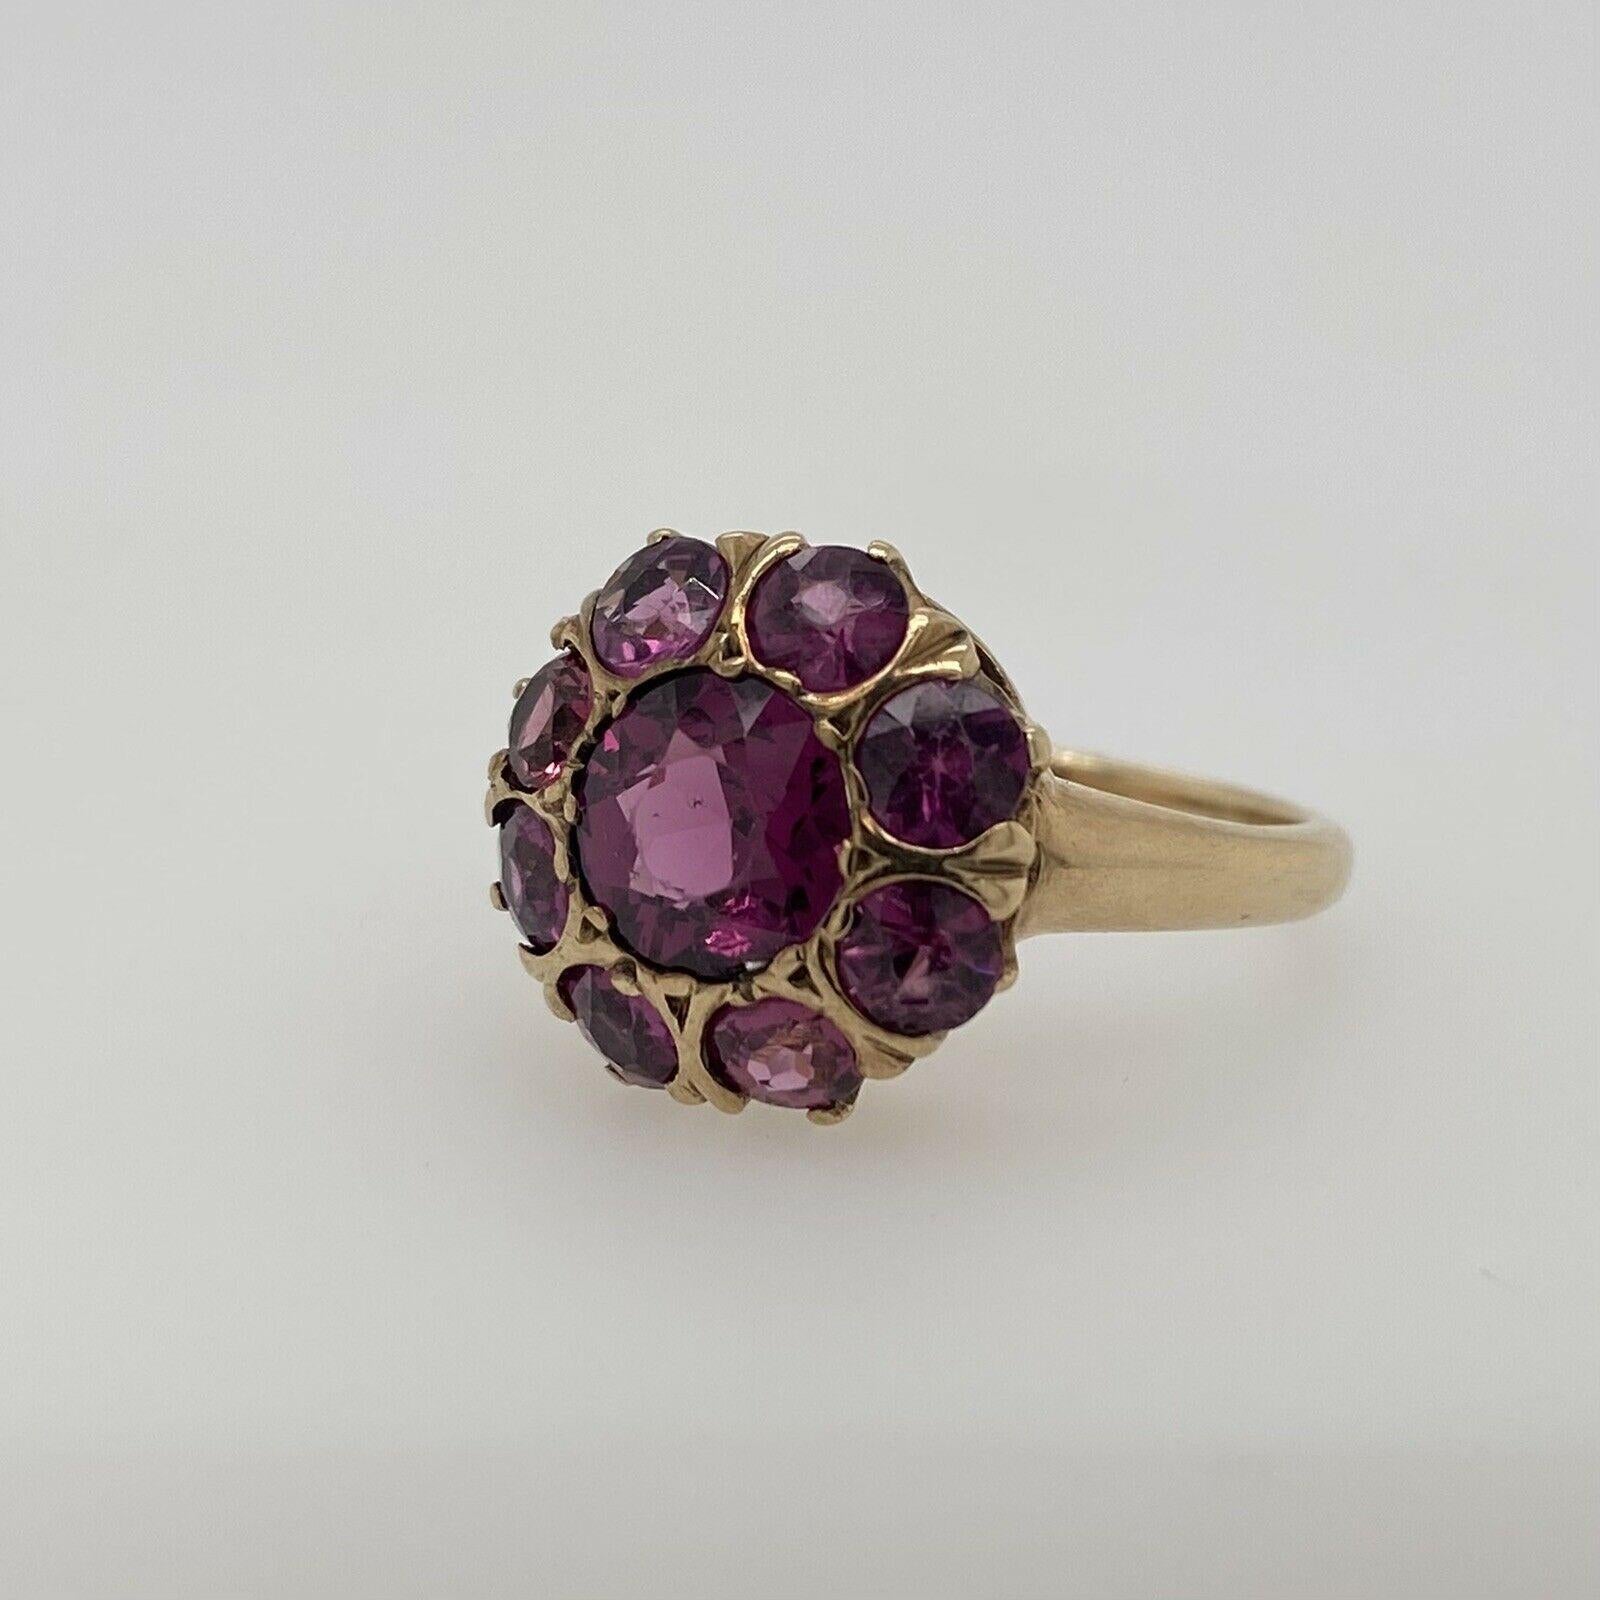 This antique 10K yellow gold ring features a genuine purple sapphire in the center measuring approximately 7.25mm. It is surrounded by 8 smaller genuine purple sapphires that measure approximately 3.70mm each. This ring is a size 6.25 and weighs 4.0